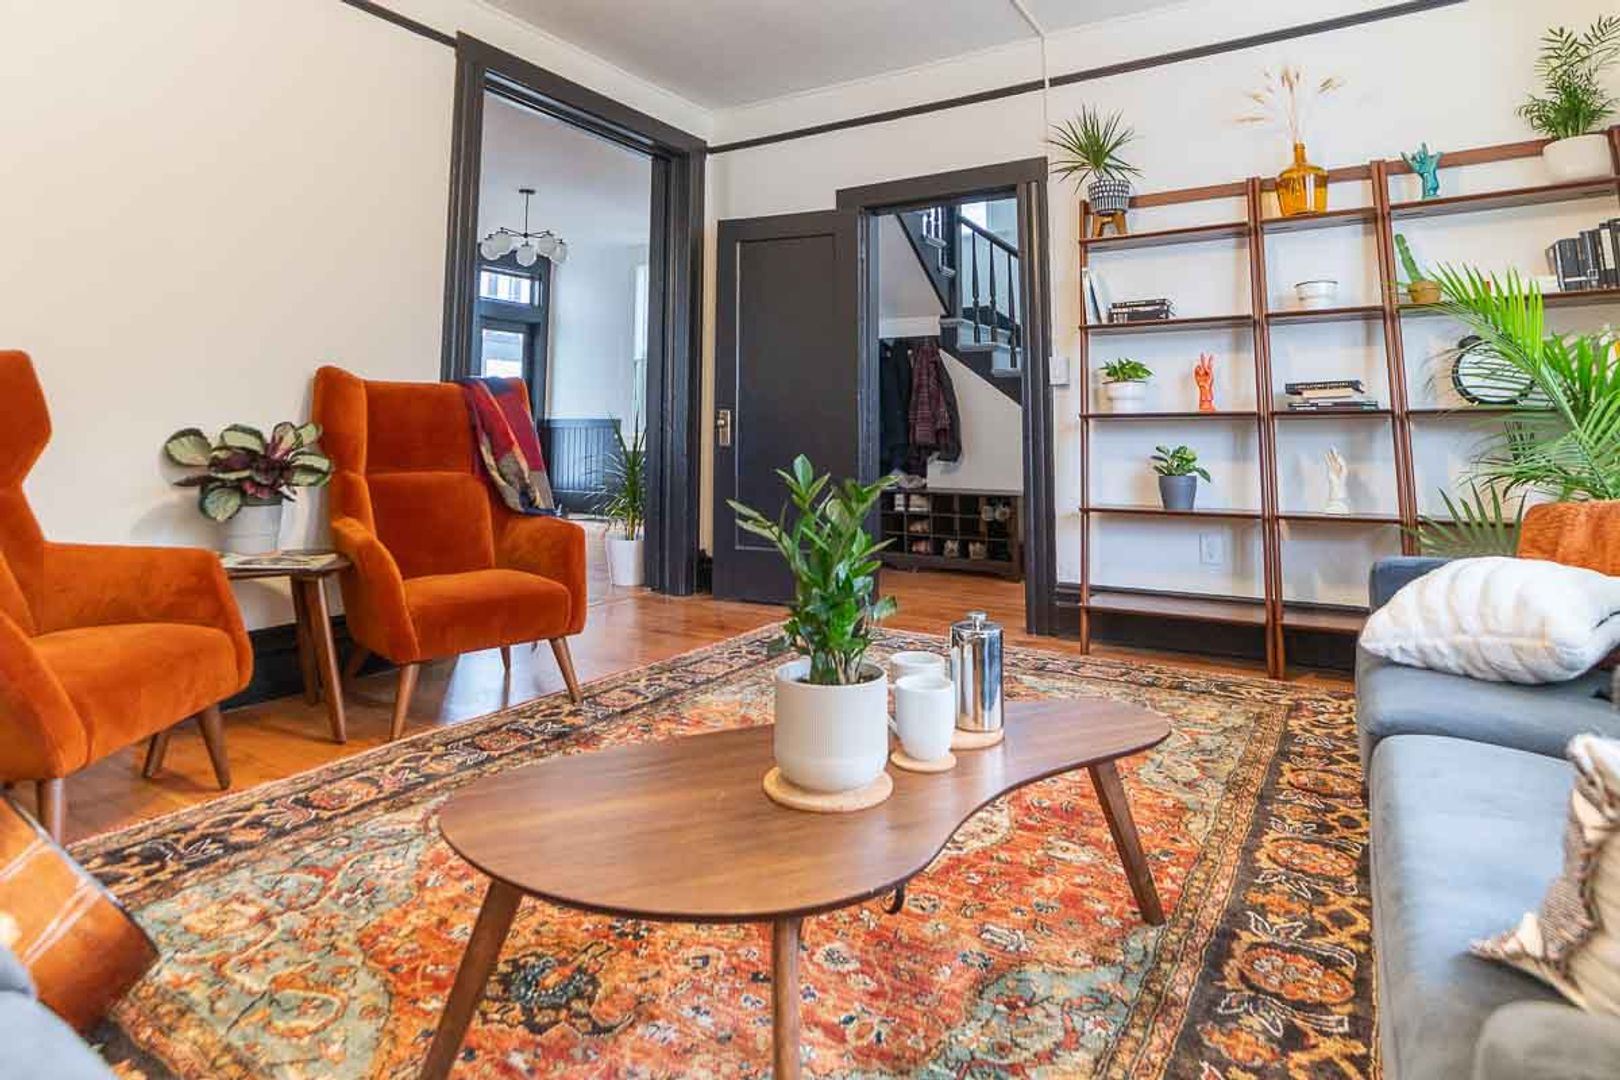 The Village Coliving Community